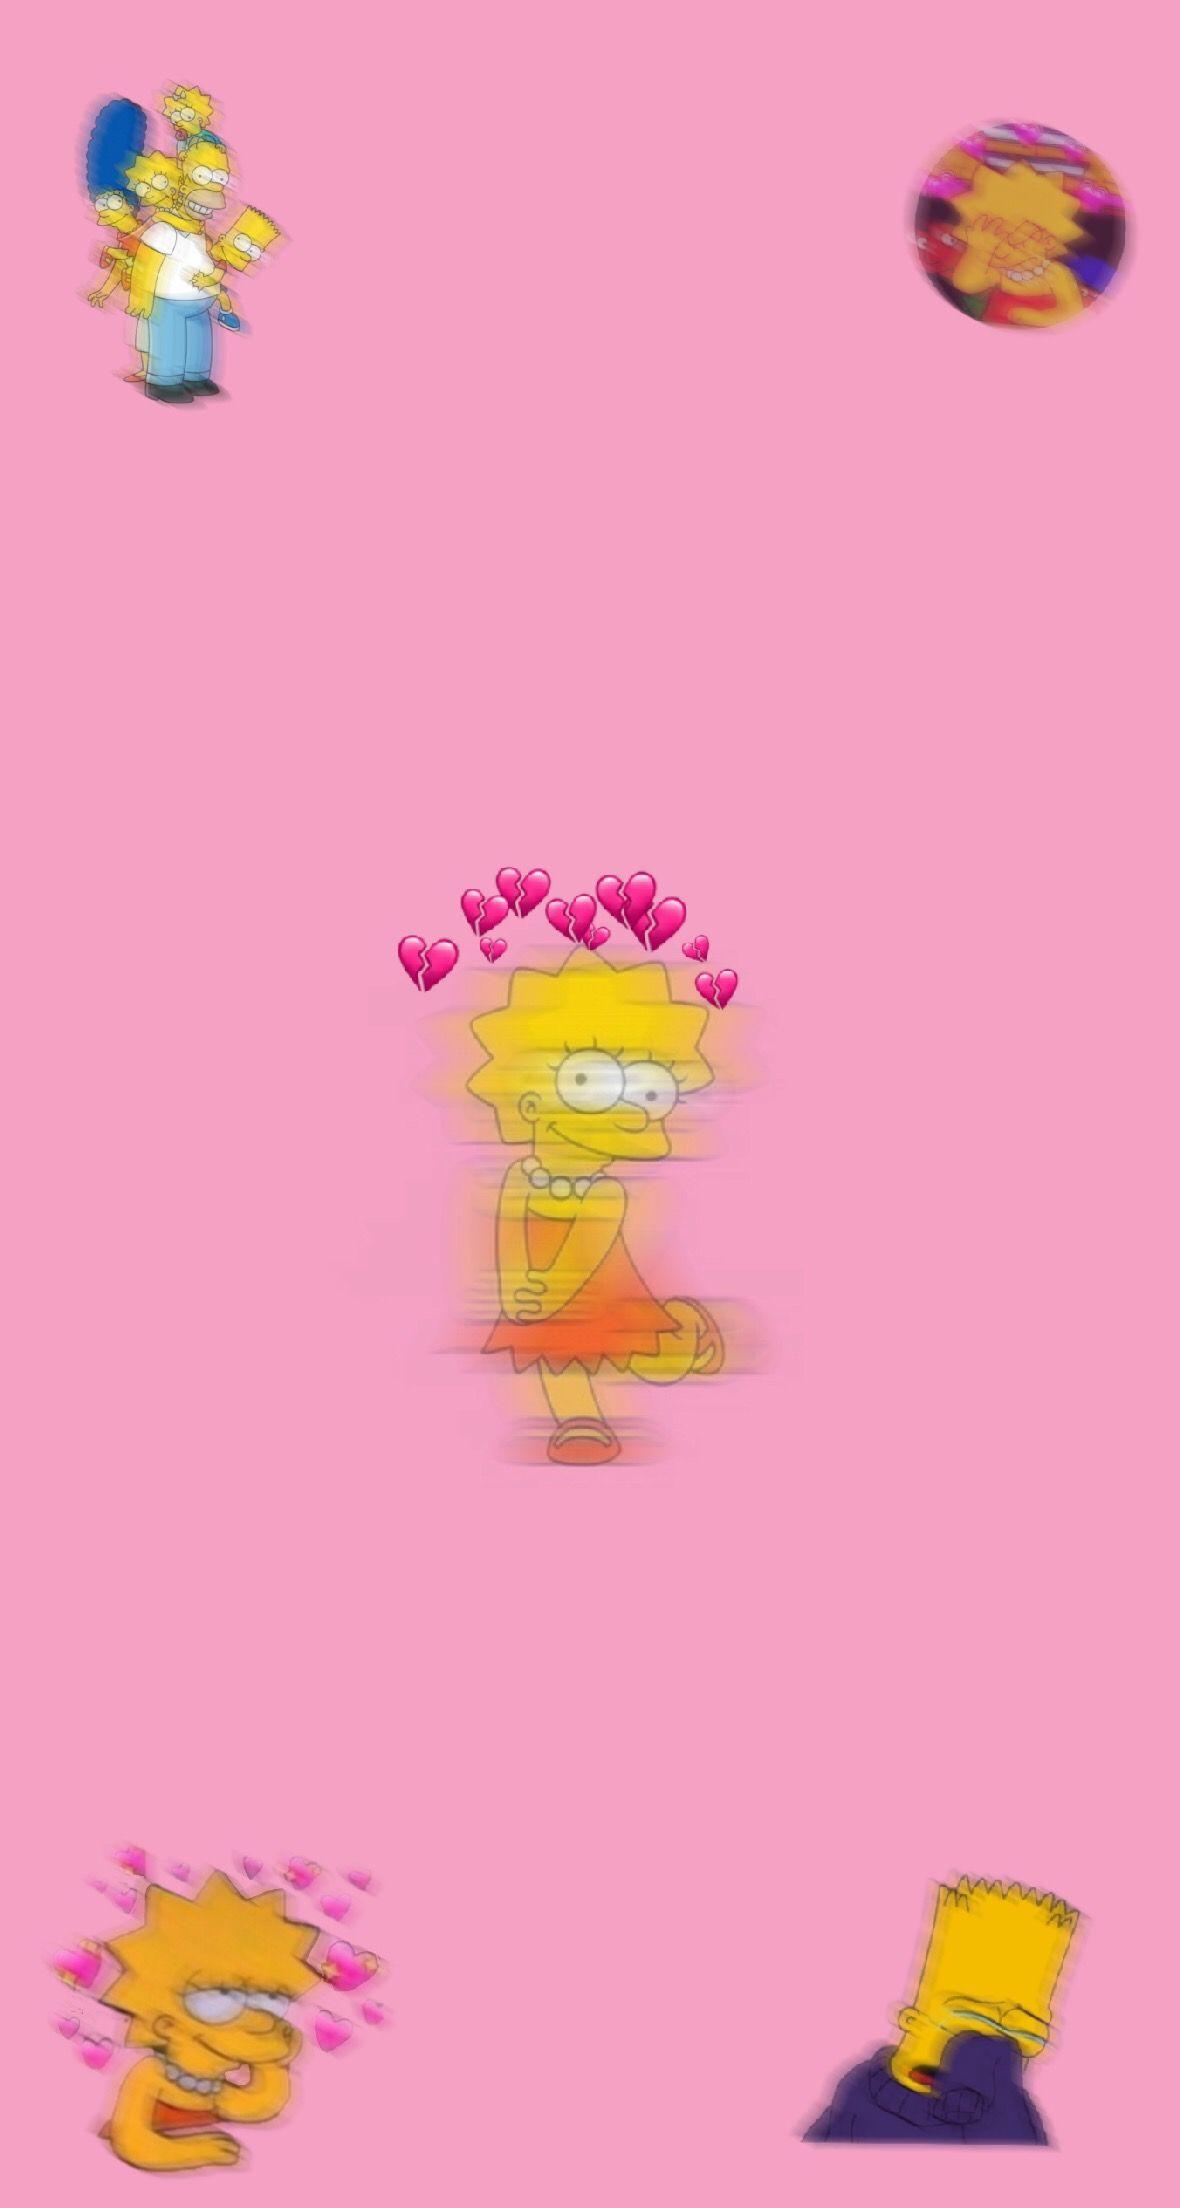 Simpsons Aesthetic Wallpapers on WallpaperDog